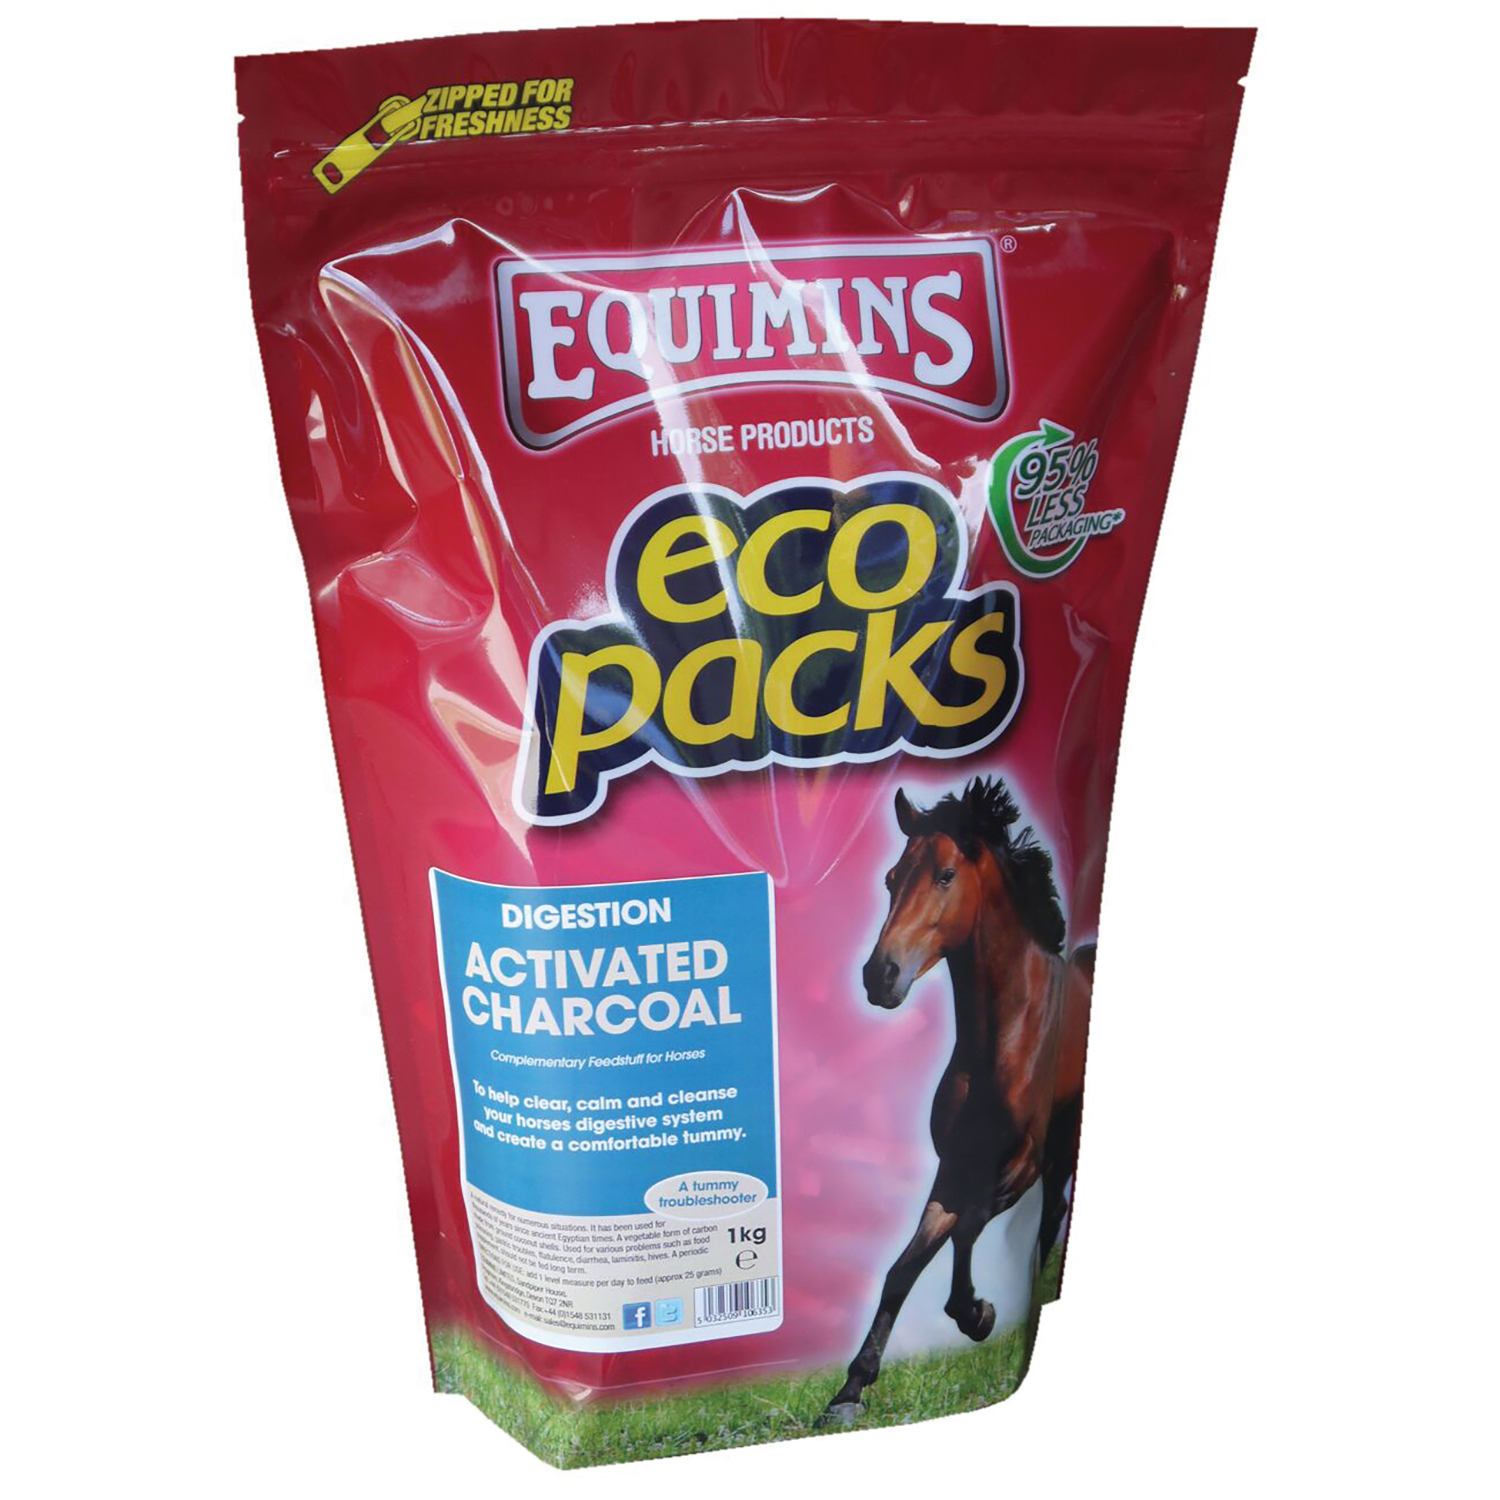 EQUIMINS ACTIVATED CHARCOAL 1 KG ECO PACK 1 KG REFILL